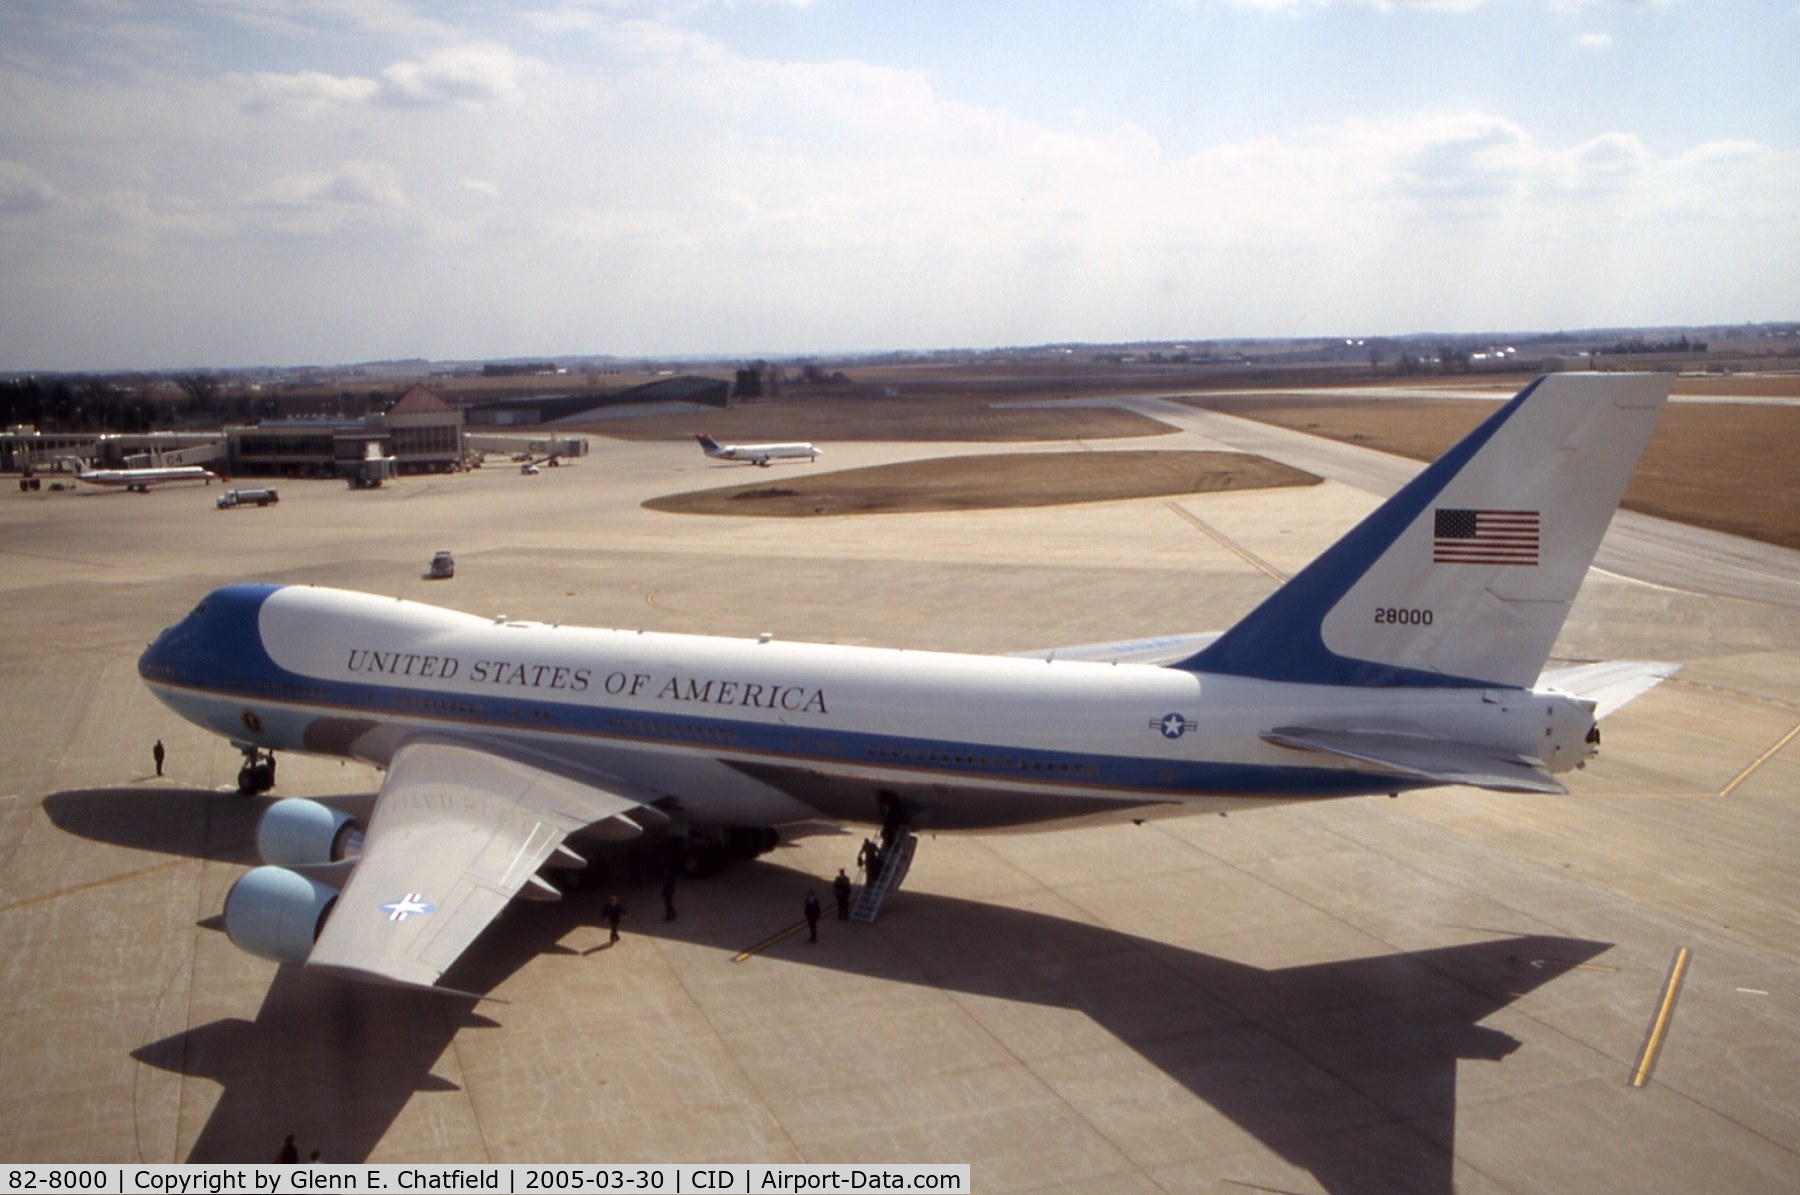 82-8000, 1987 Boeing VC-25A (747-2G4B) C/N 23824, Air Force One parked on the cargo ramp below the control tower